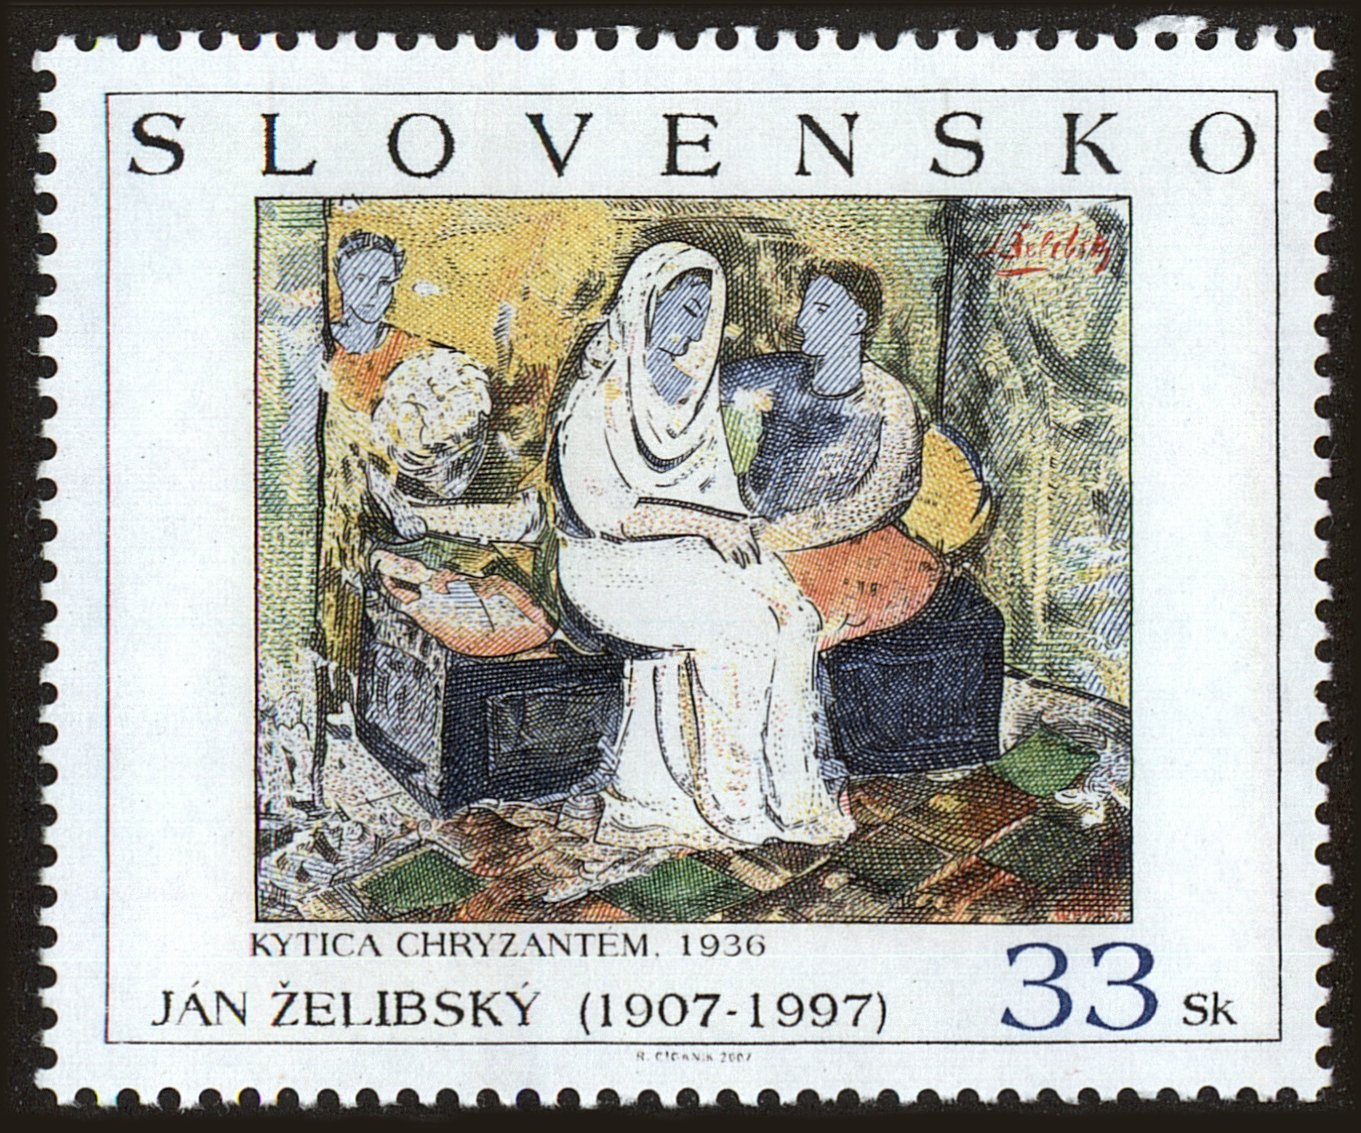 Front view of Slovakia 531 collectors stamp